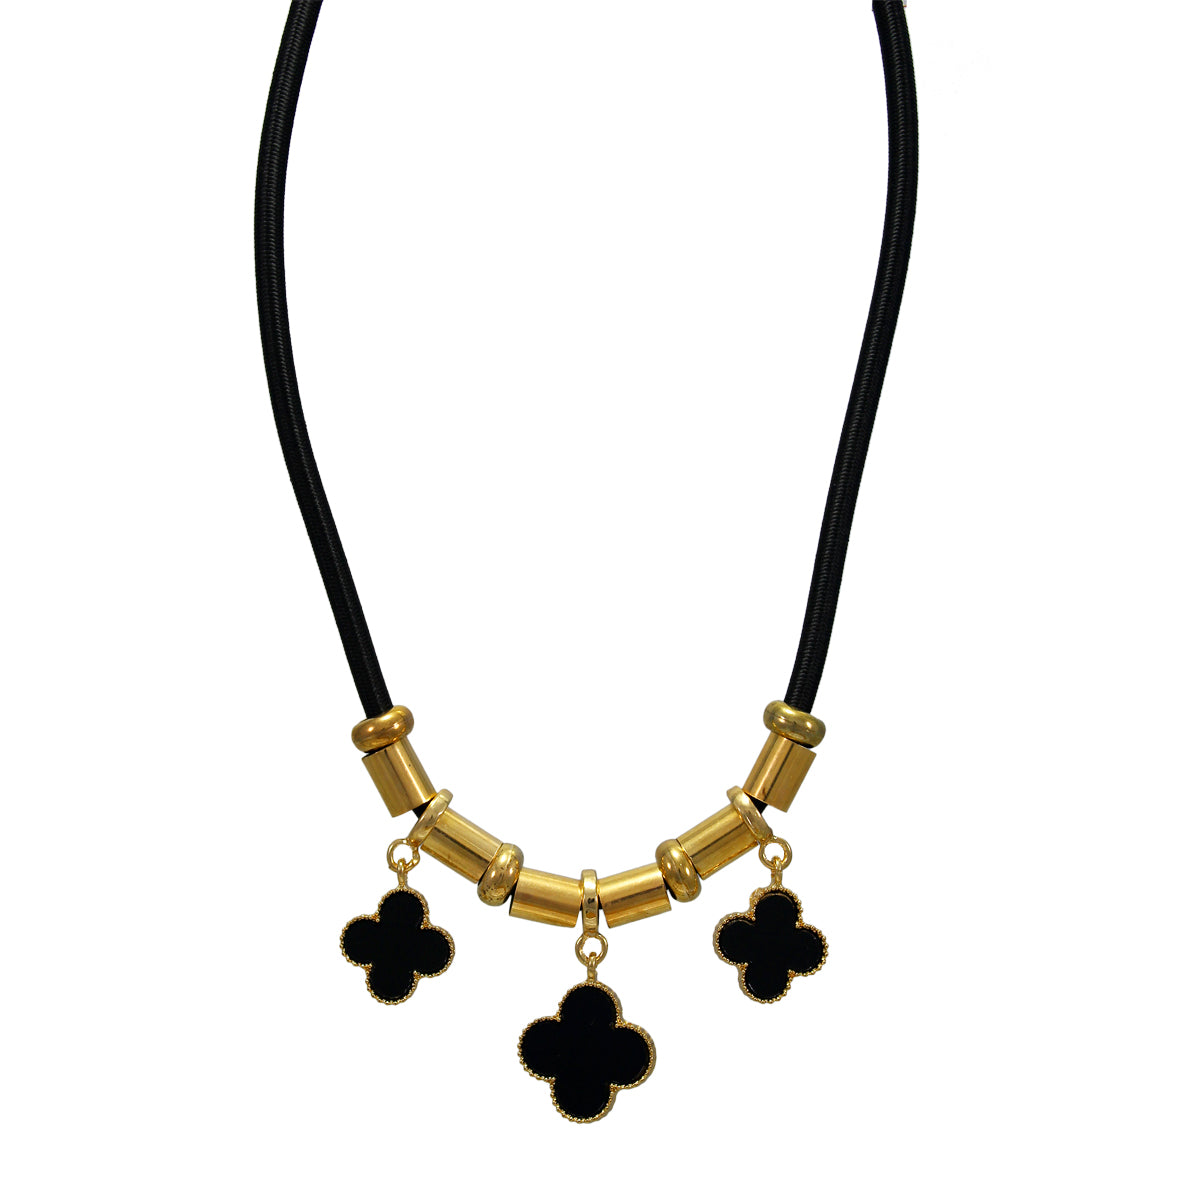 Abhinn Designer Statement Golden Necklace With Cylindrical Beads And Black Flower For Women